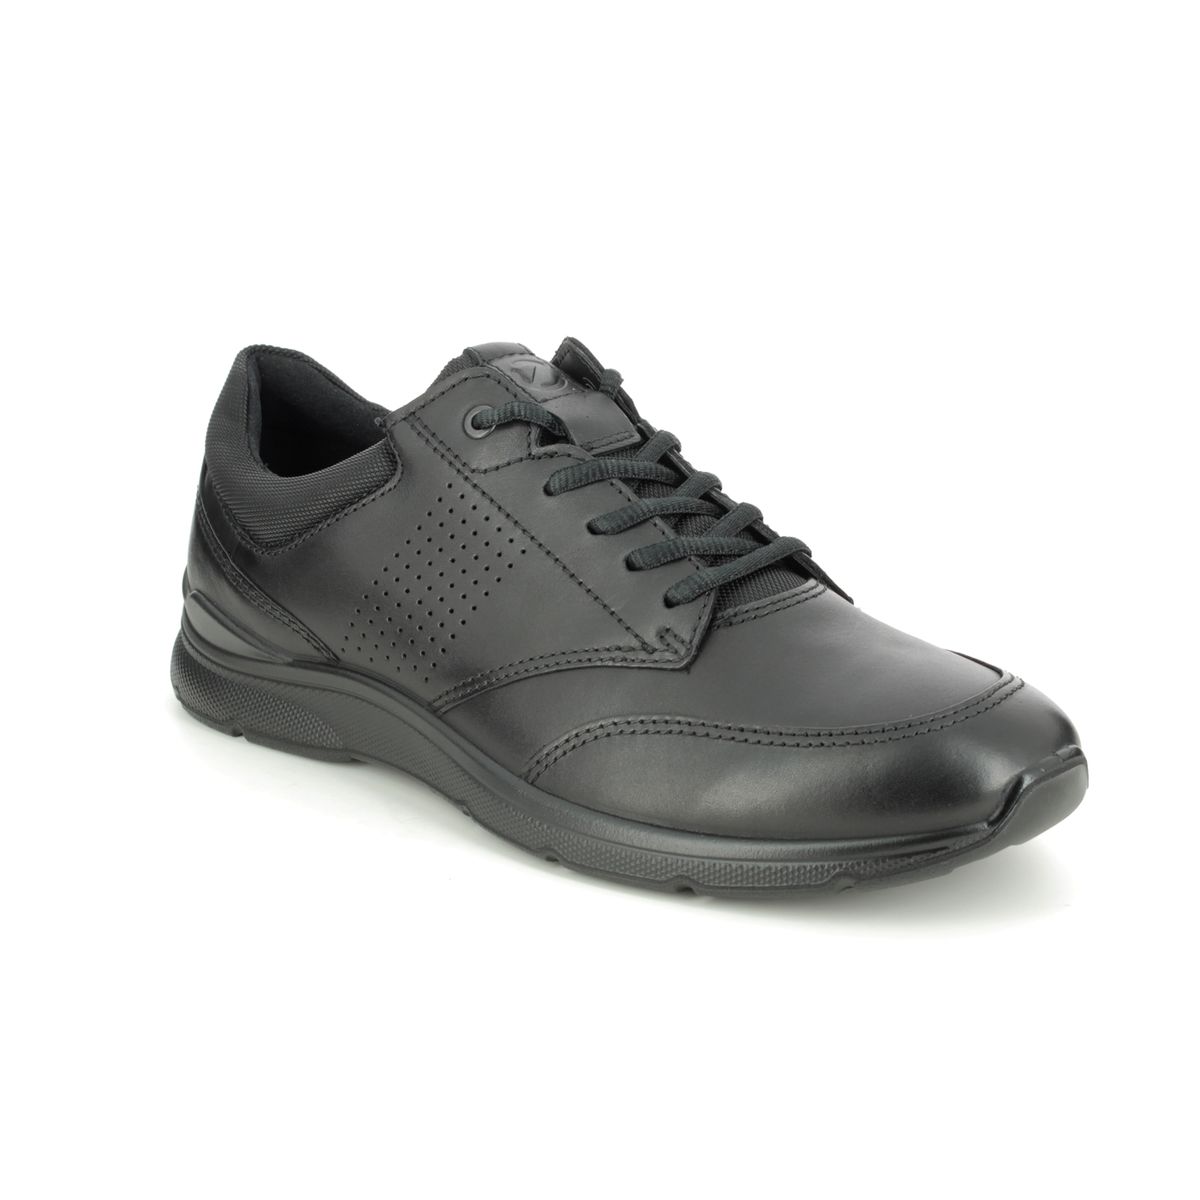 Ecco Irving Black Leather Mens Comfort Shoes 511734-51052 In Size 47 In Plain Black Leather